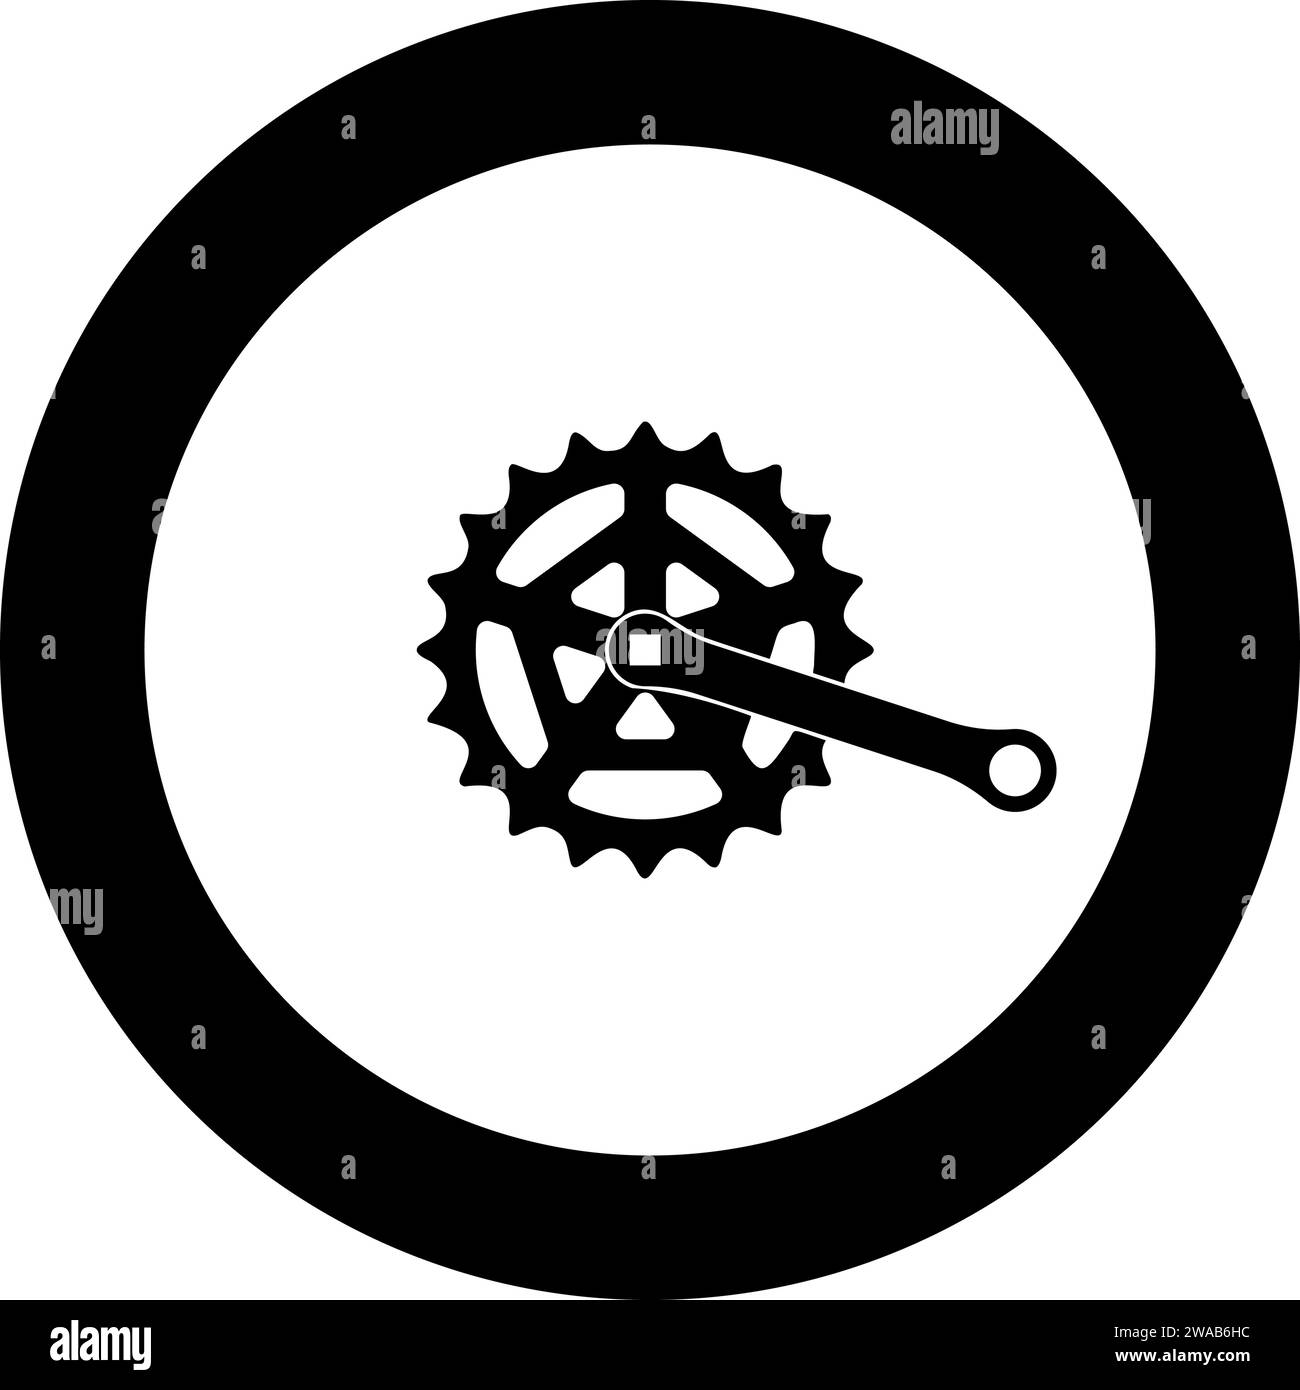 Crankset cogwheel sprocket crank length with gear for bicycle cassette system bike icon in circle round black color vector illustration image solid Stock Vector